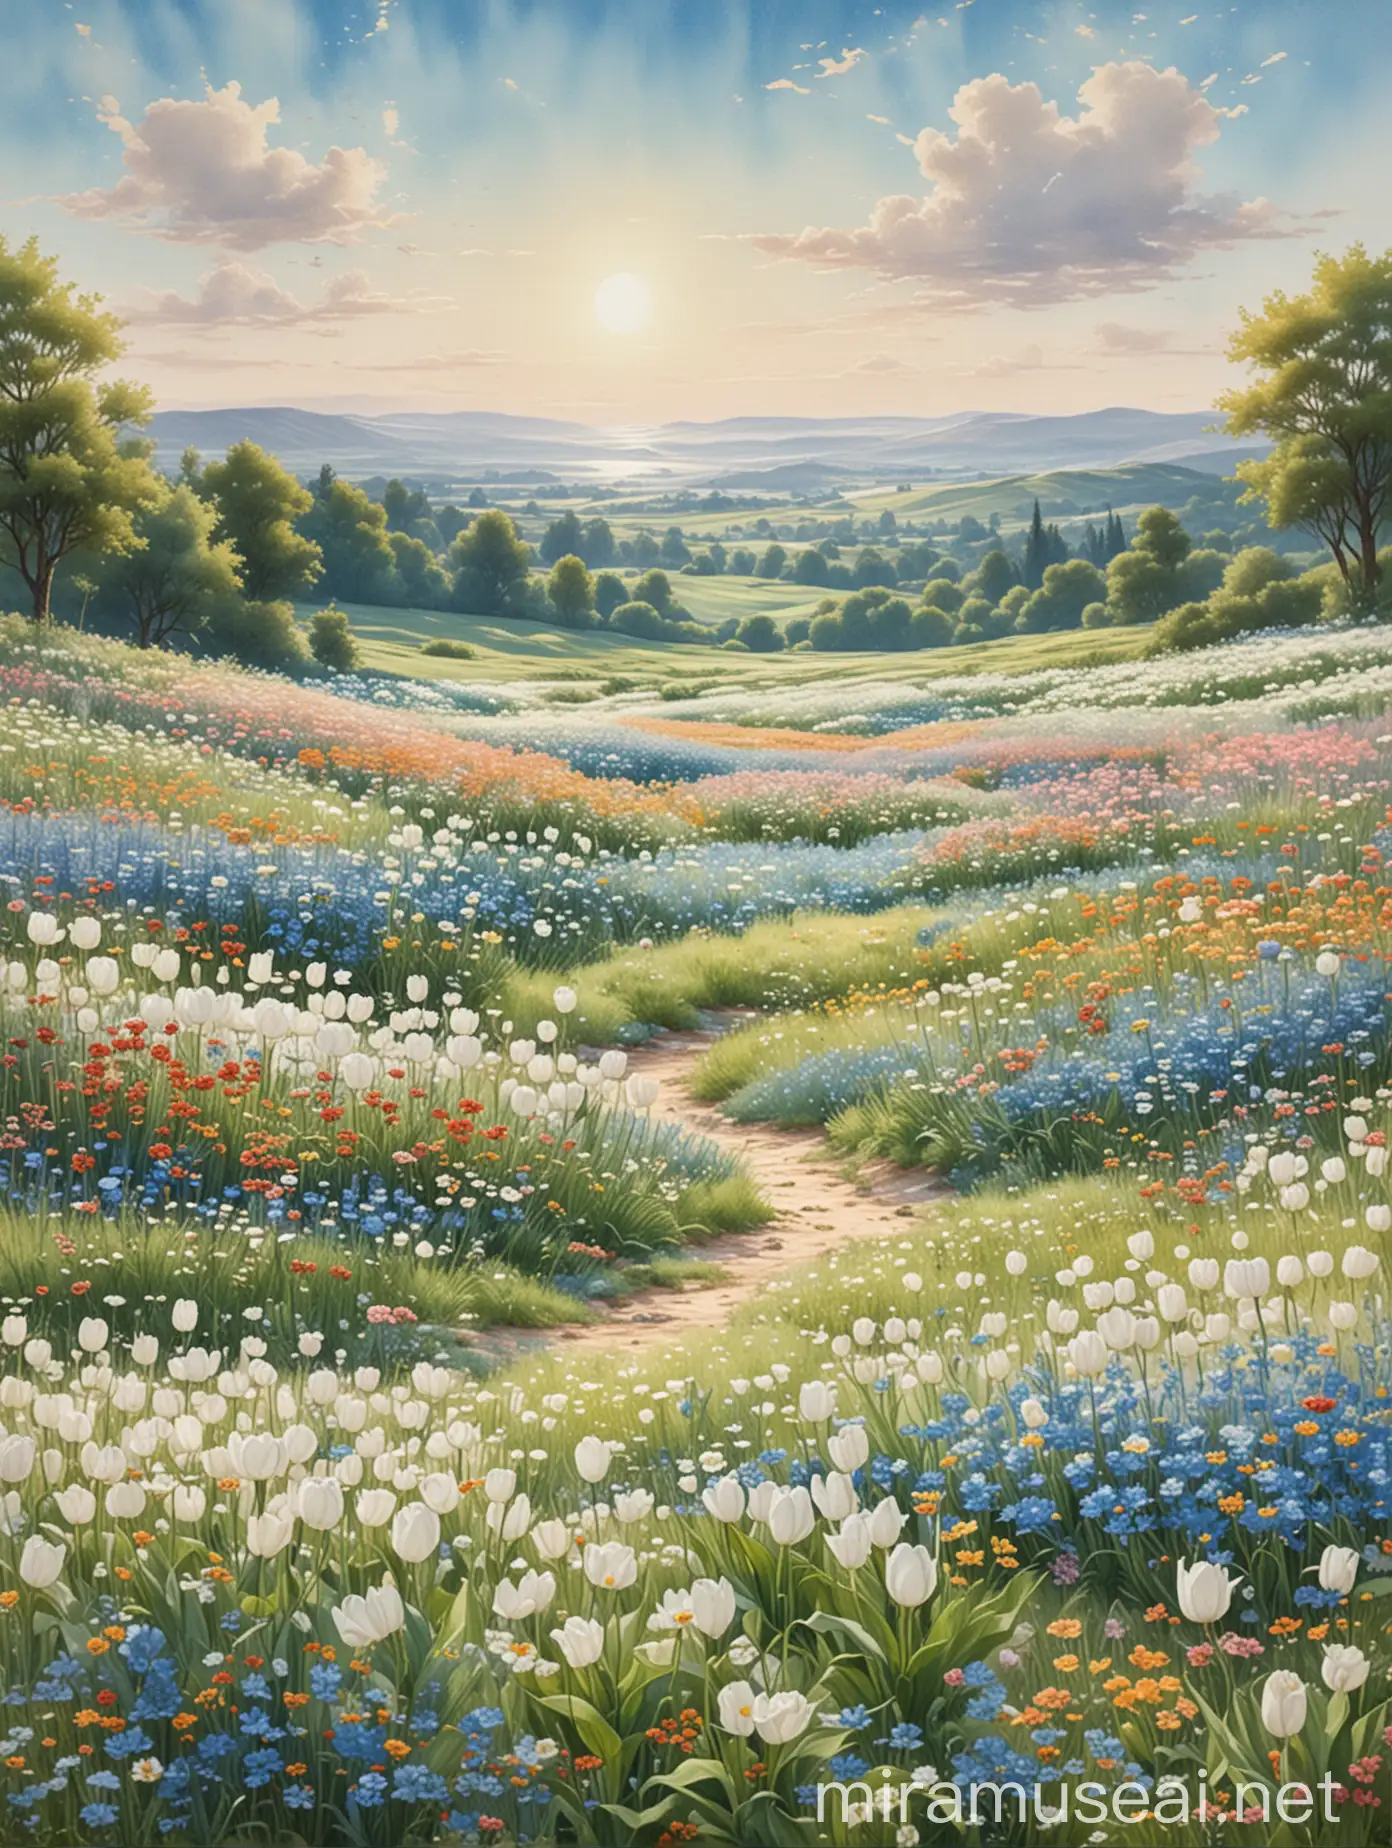 Tranquil Sunlit Flower Field Landscape with White Tulips and Gentle Hilltops